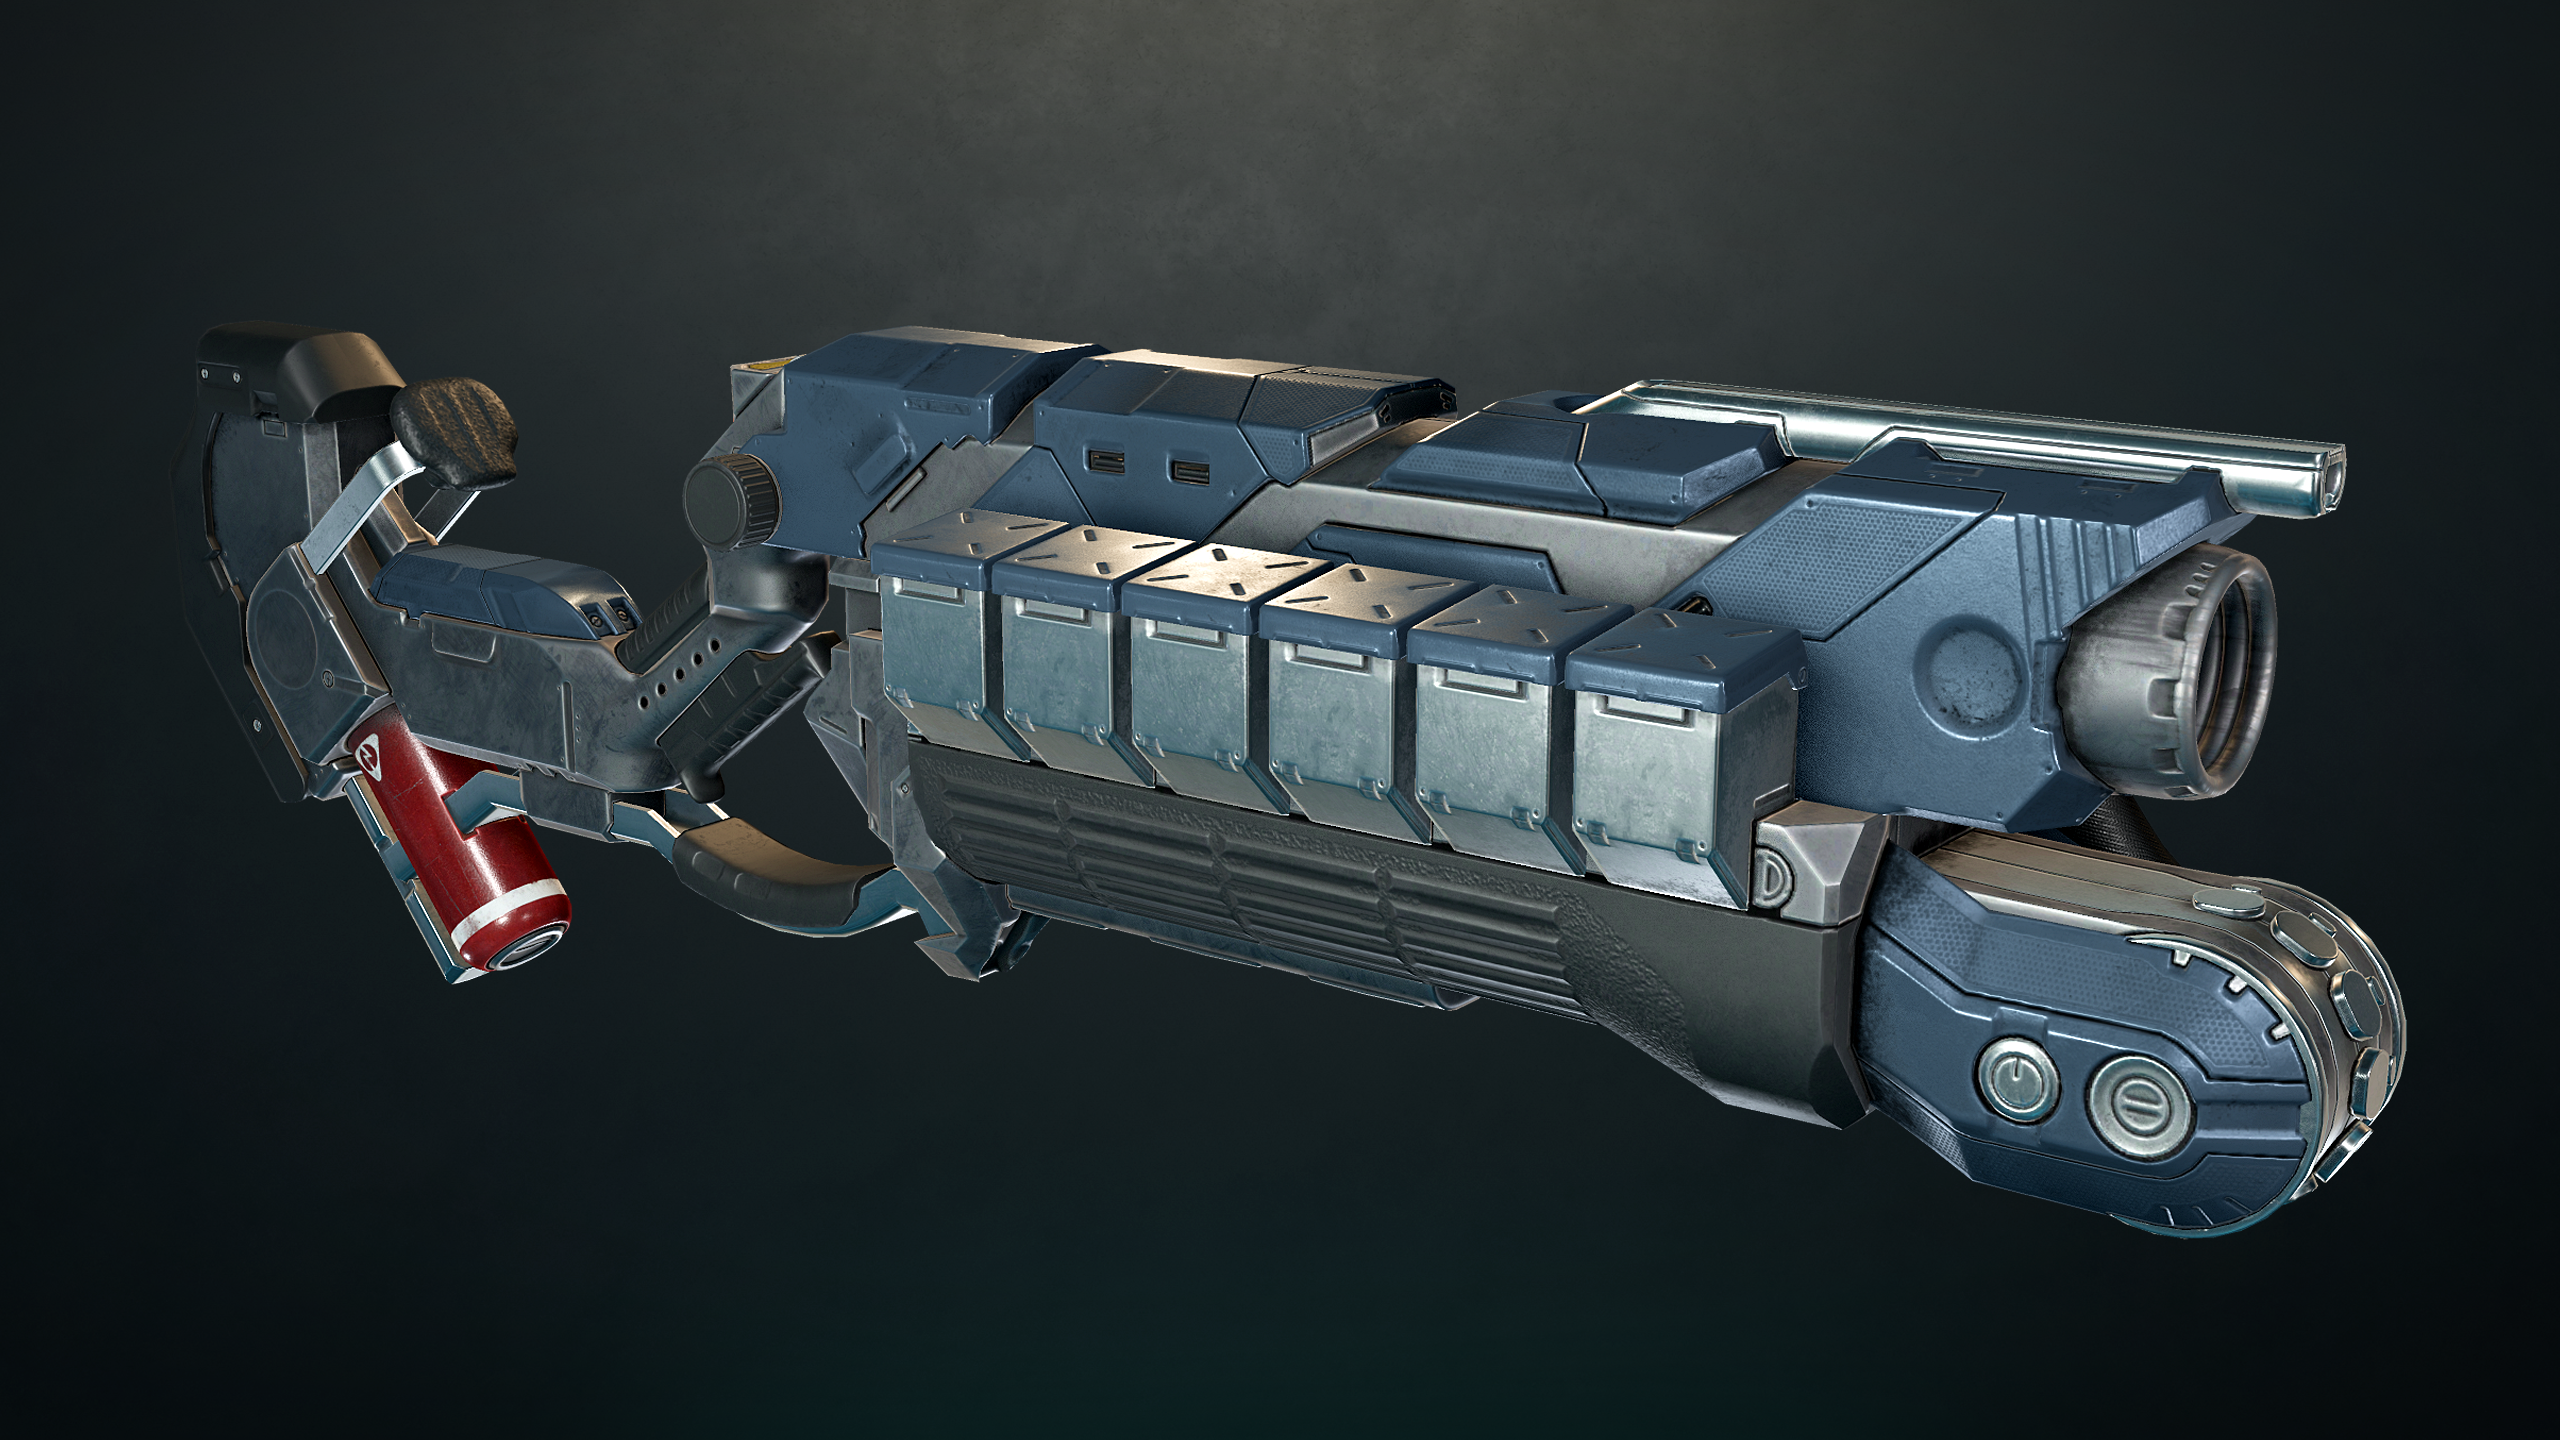 Starbase weapons arclighter bg 18.10.2019.png